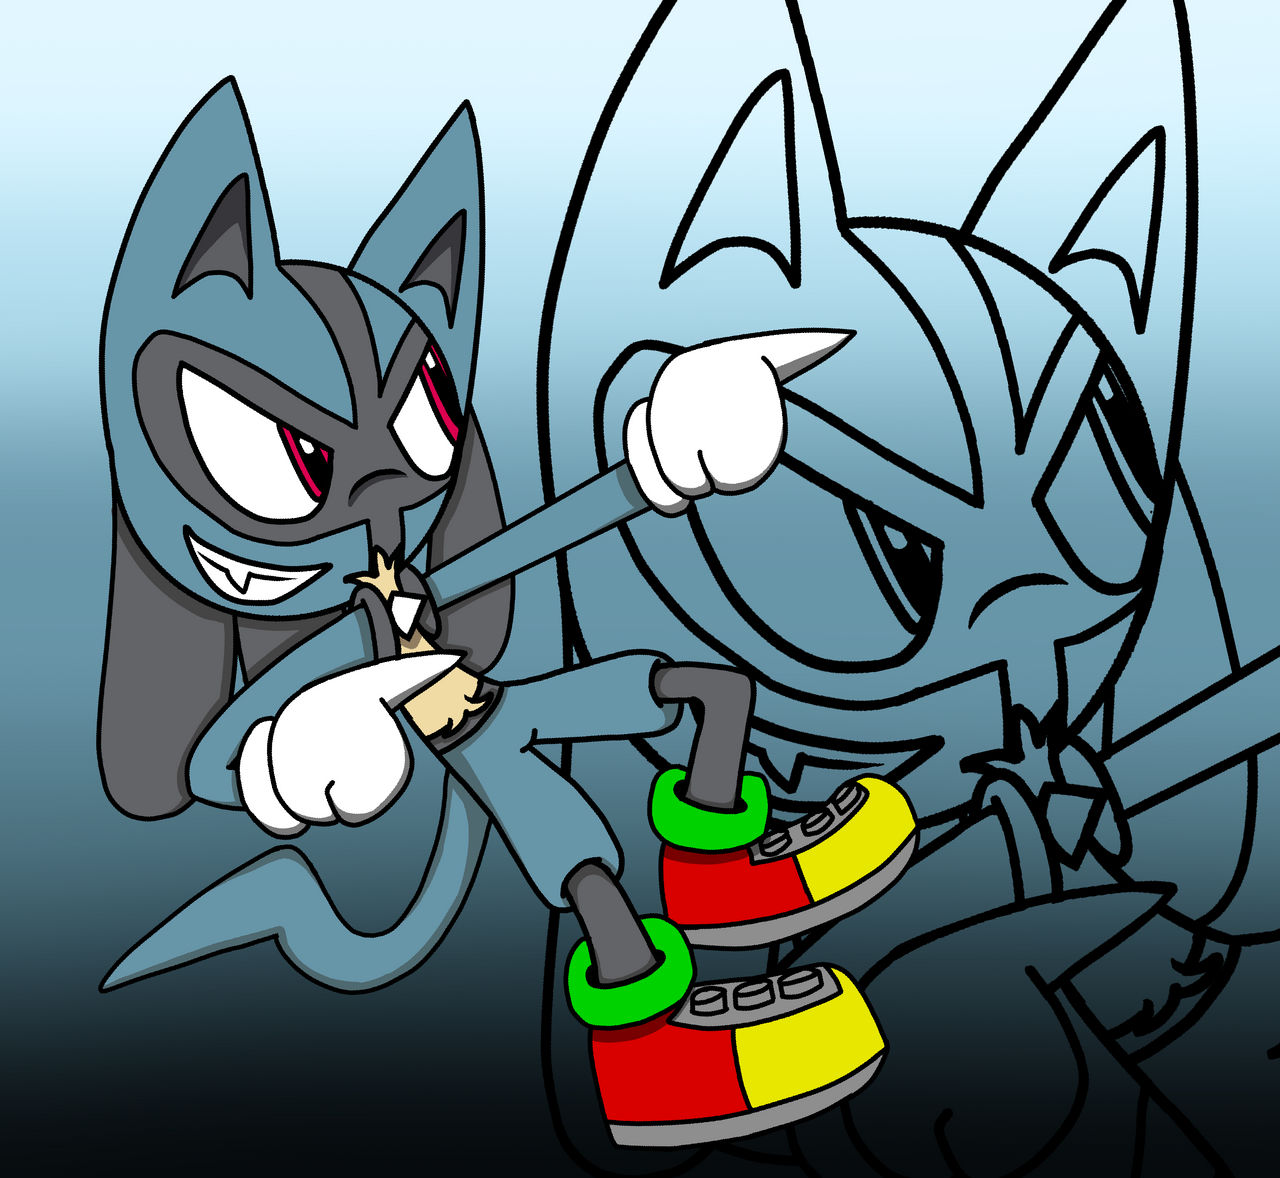 Sonic R: Tails doll story by pepperthe2008rabbit on DeviantArt